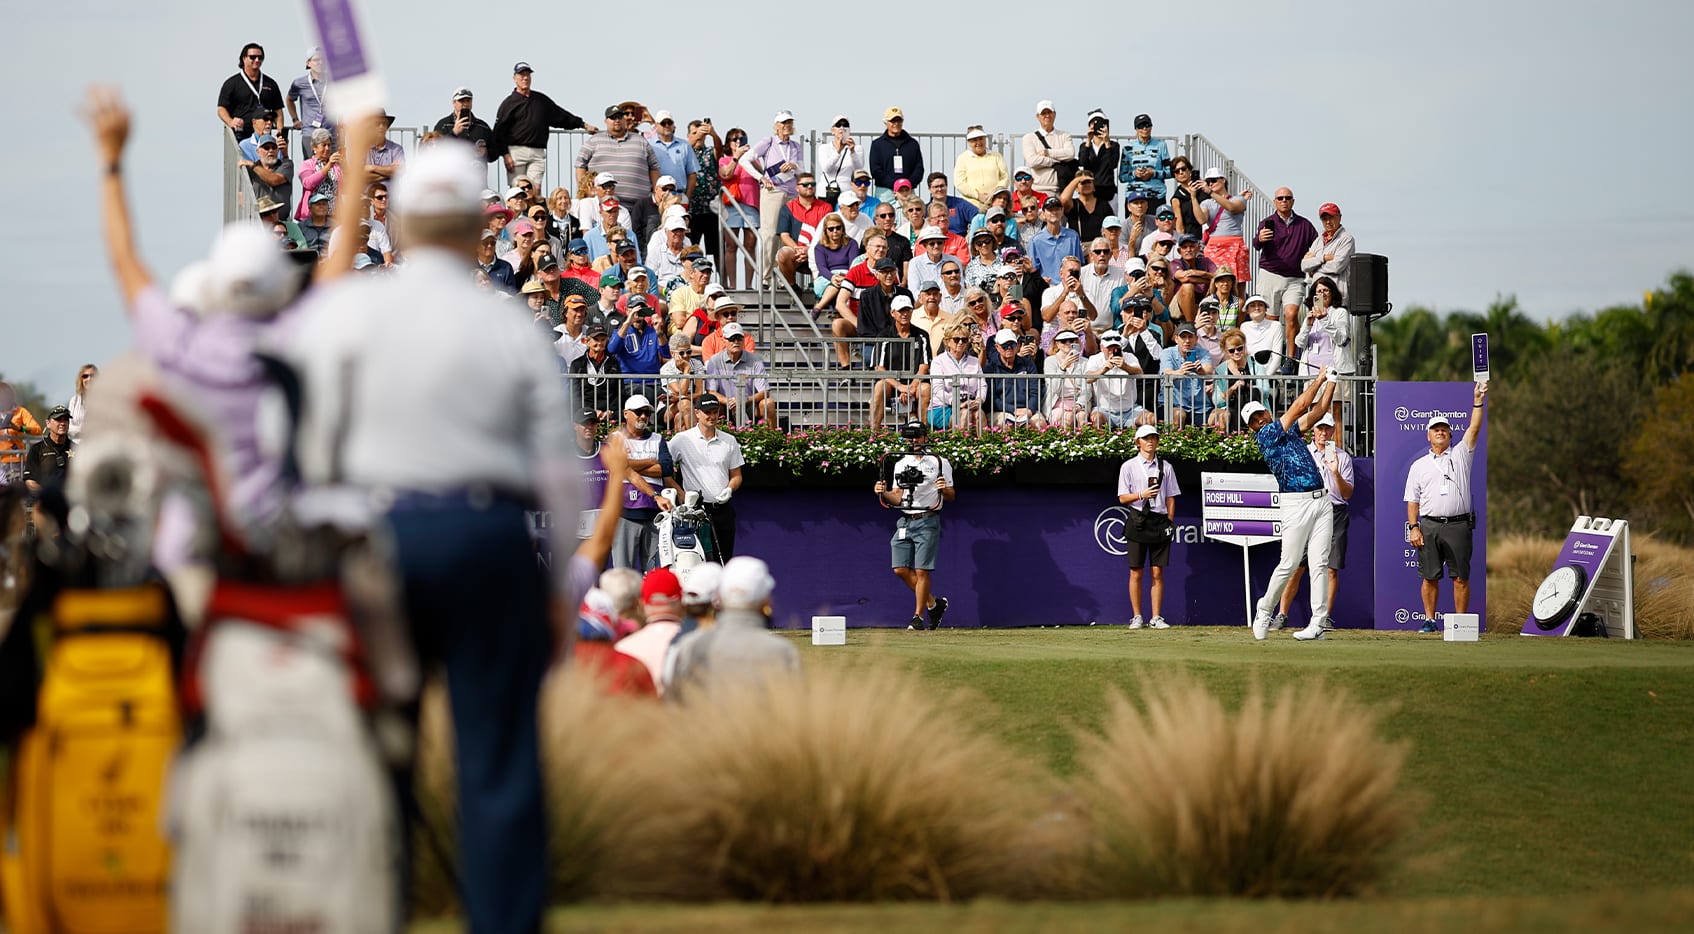 How to watch Grant Thornton Invitational, Round 2 Live scores, tee